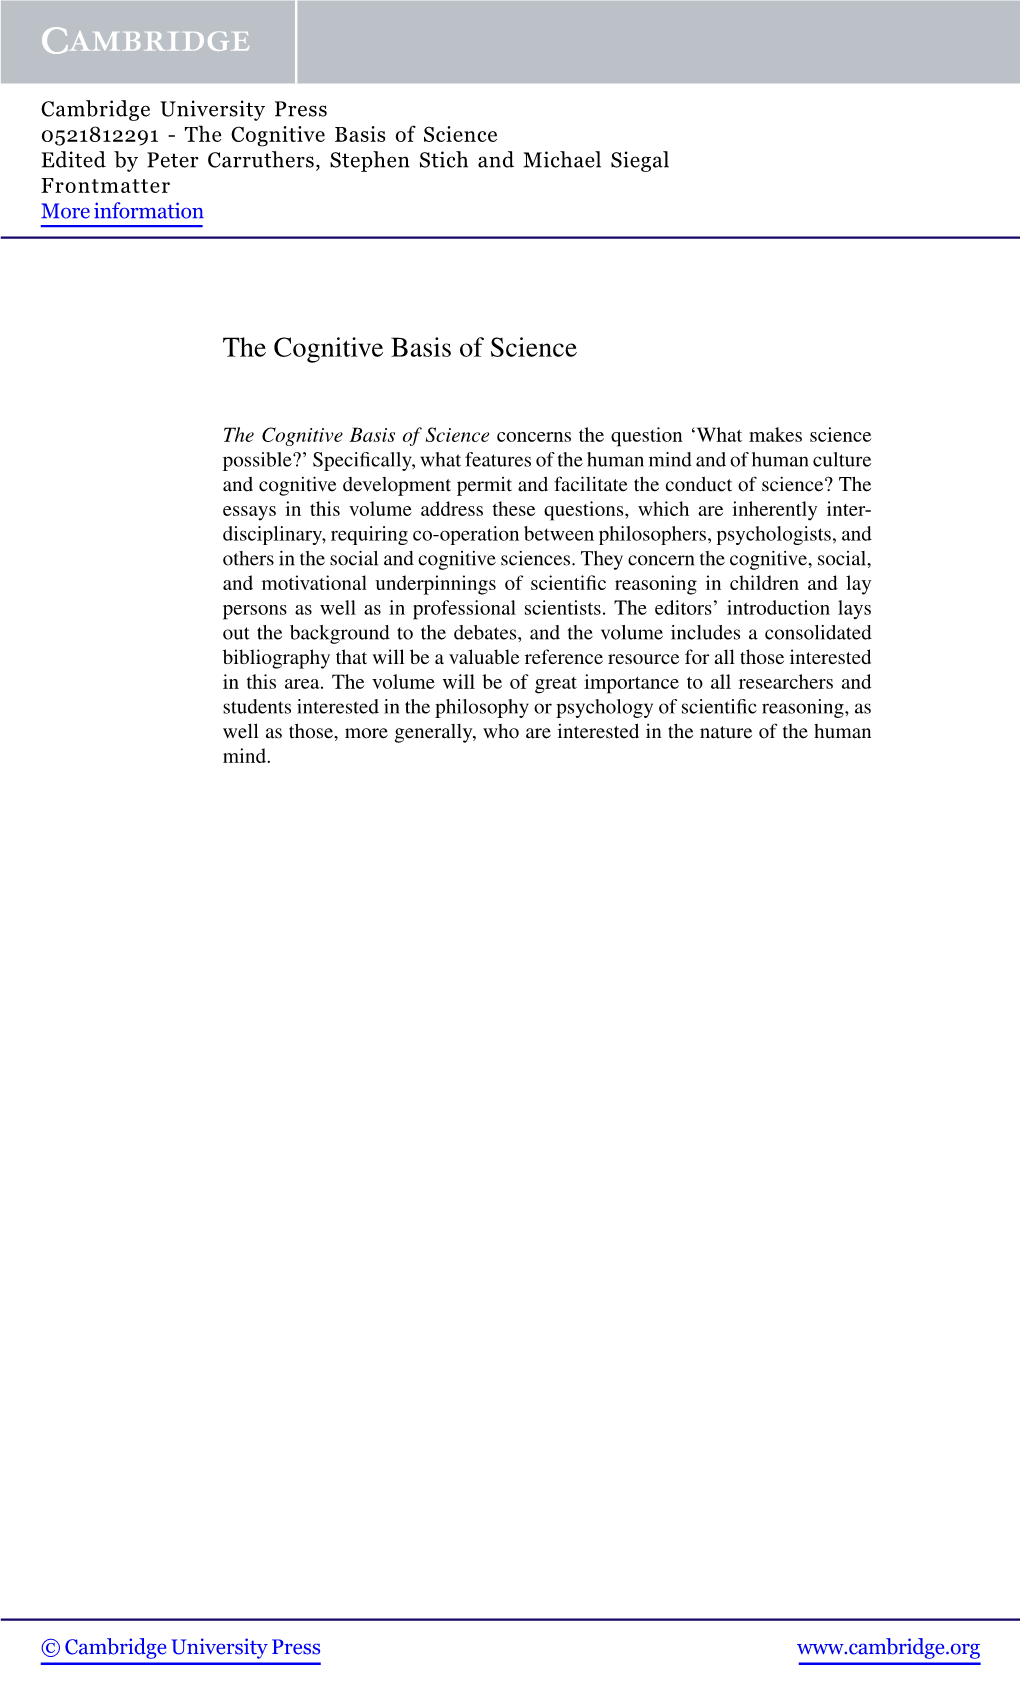 The Cognitive Basis of Science Edited by Peter Carruthers, Stephen Stich and Michael Siegal Frontmatter More Information